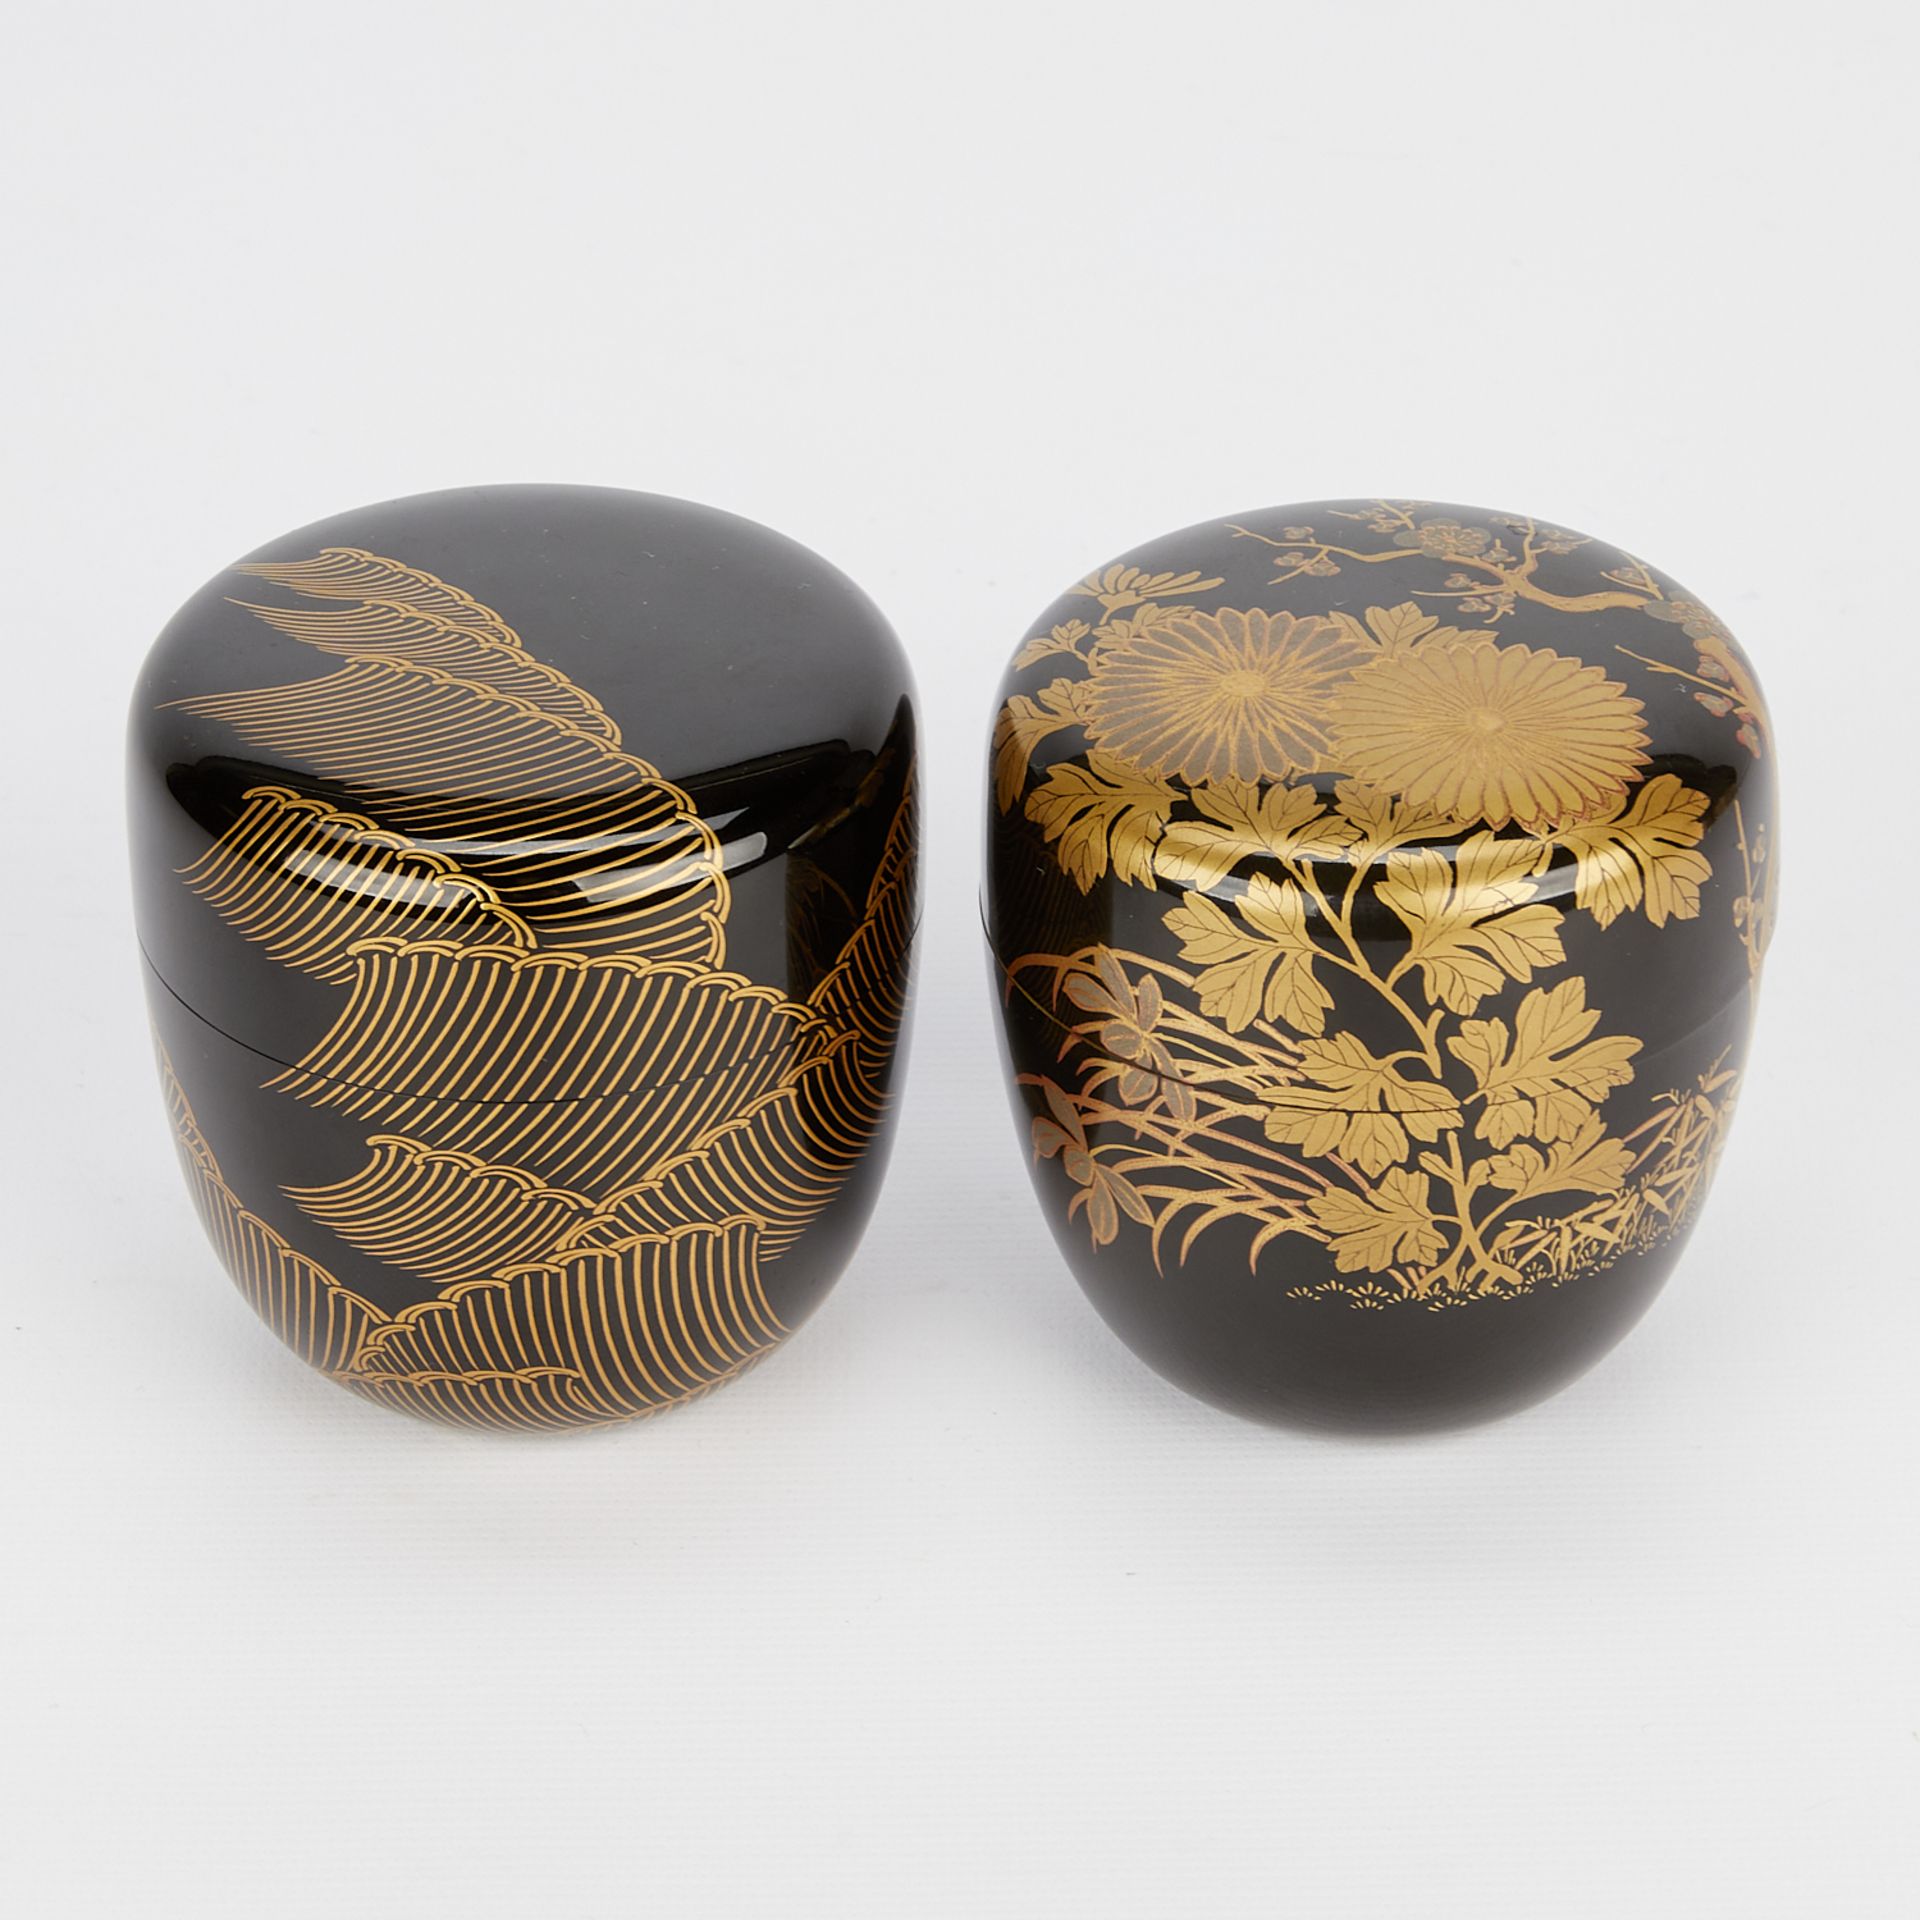 2 Japanese Natsume Tea Caddies in Boxes - Image 7 of 16